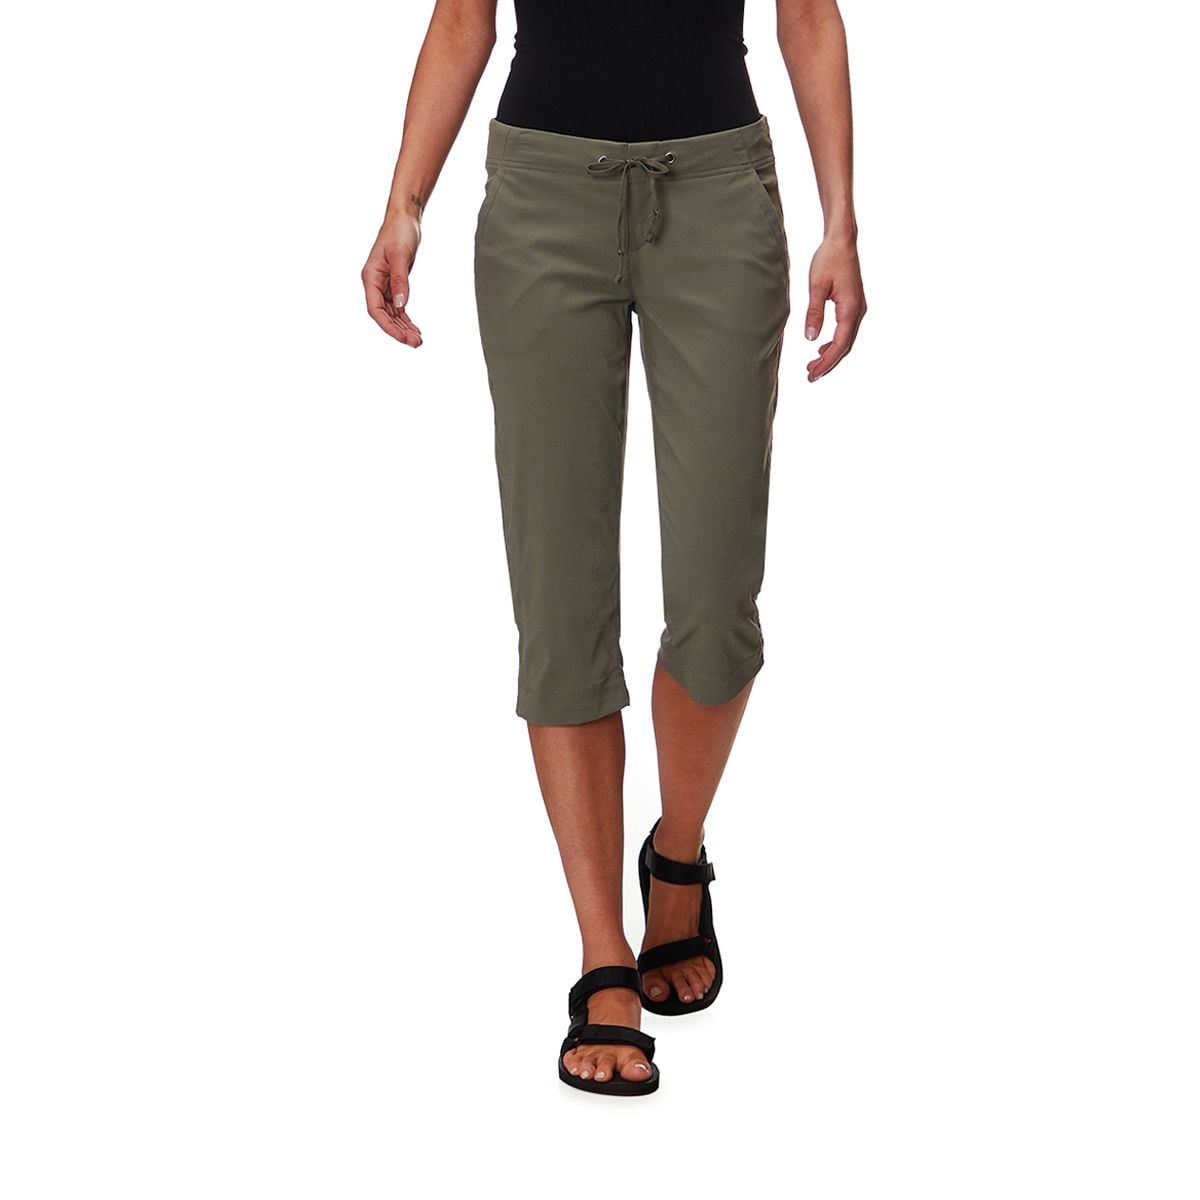 Columbia - Women's Outdoor Clothing. Sustainable fashion and apparel.